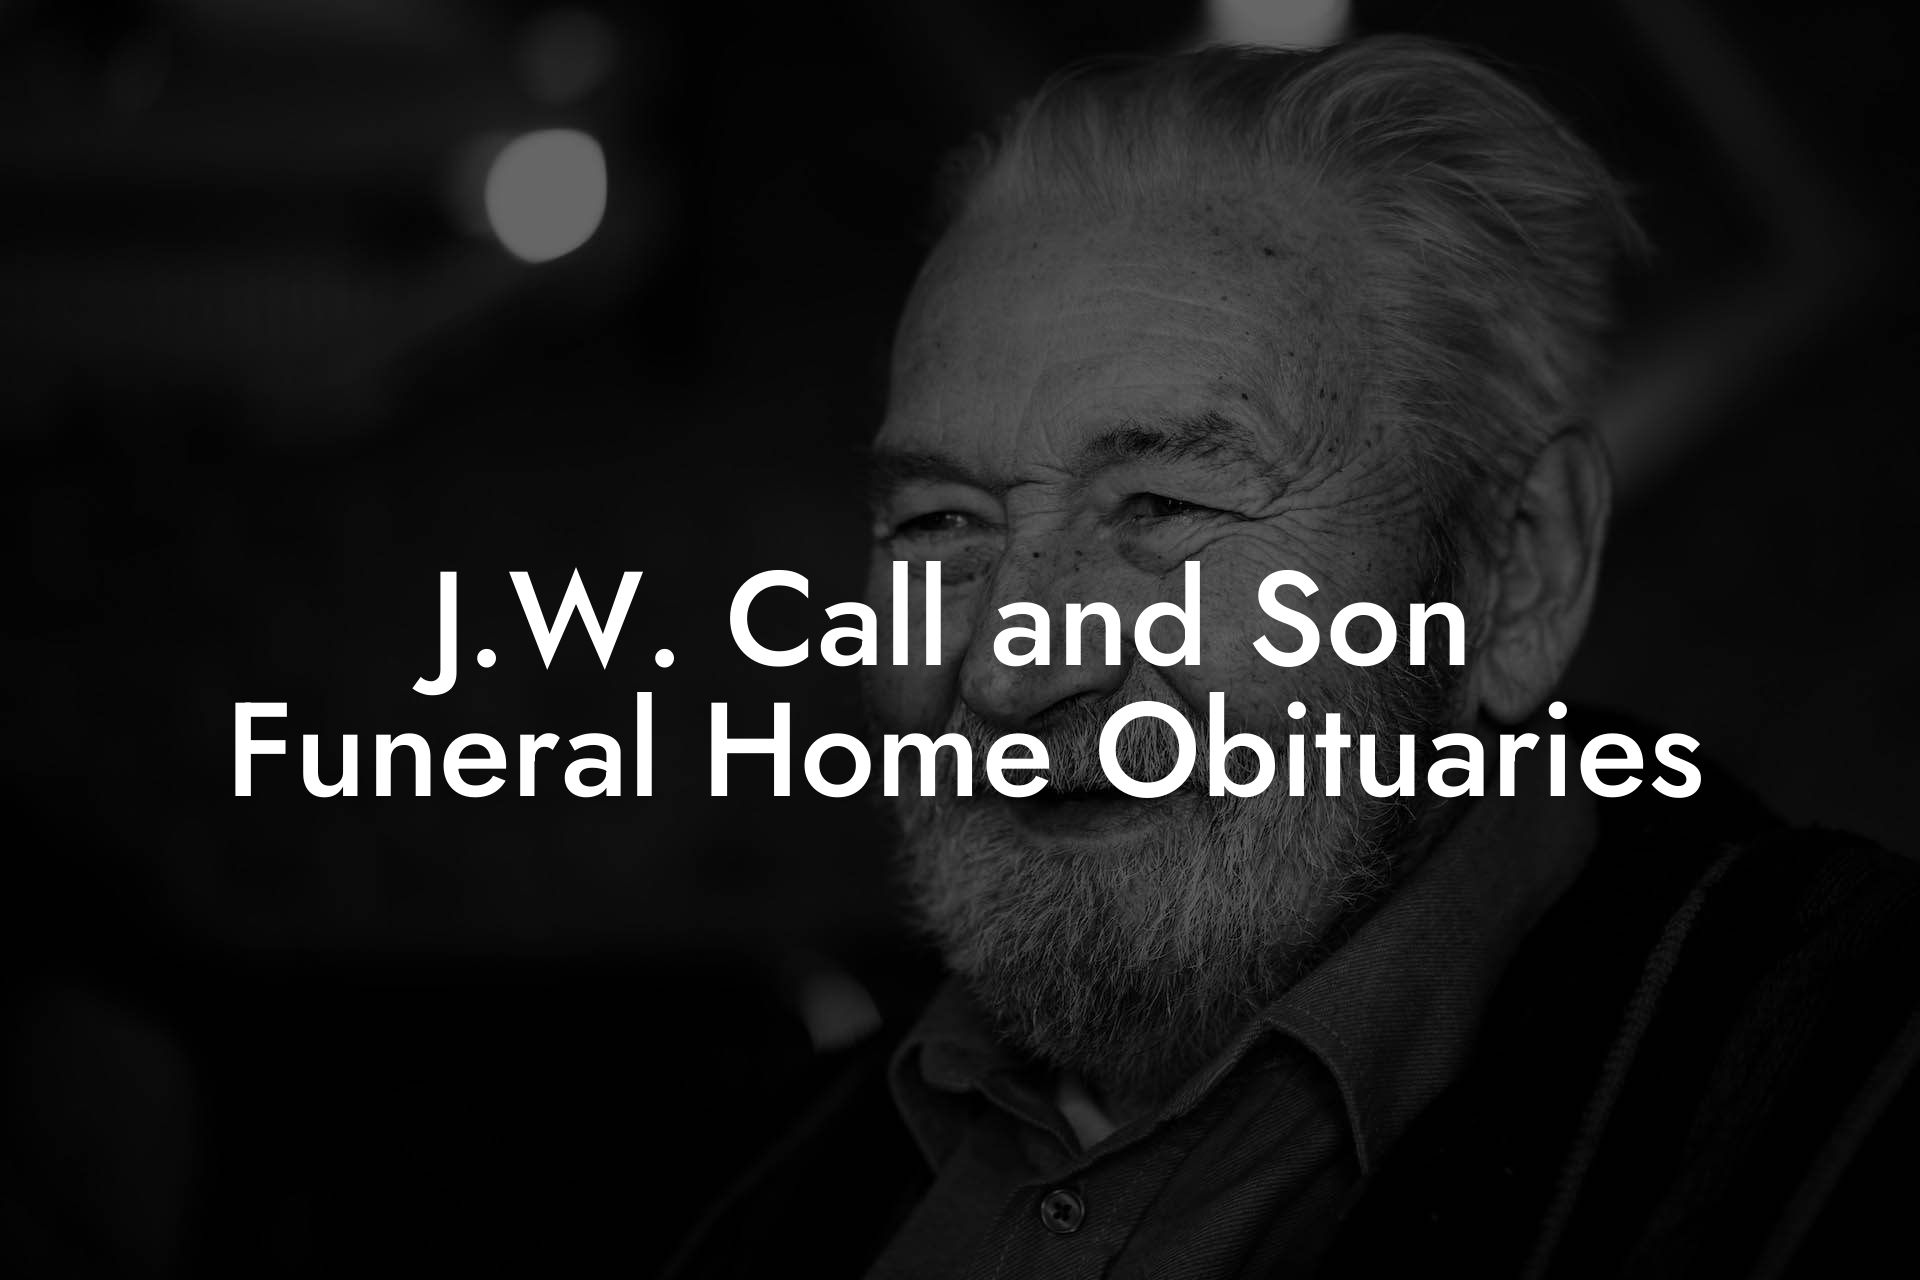 J.W. Call and Son Funeral Home Obituaries